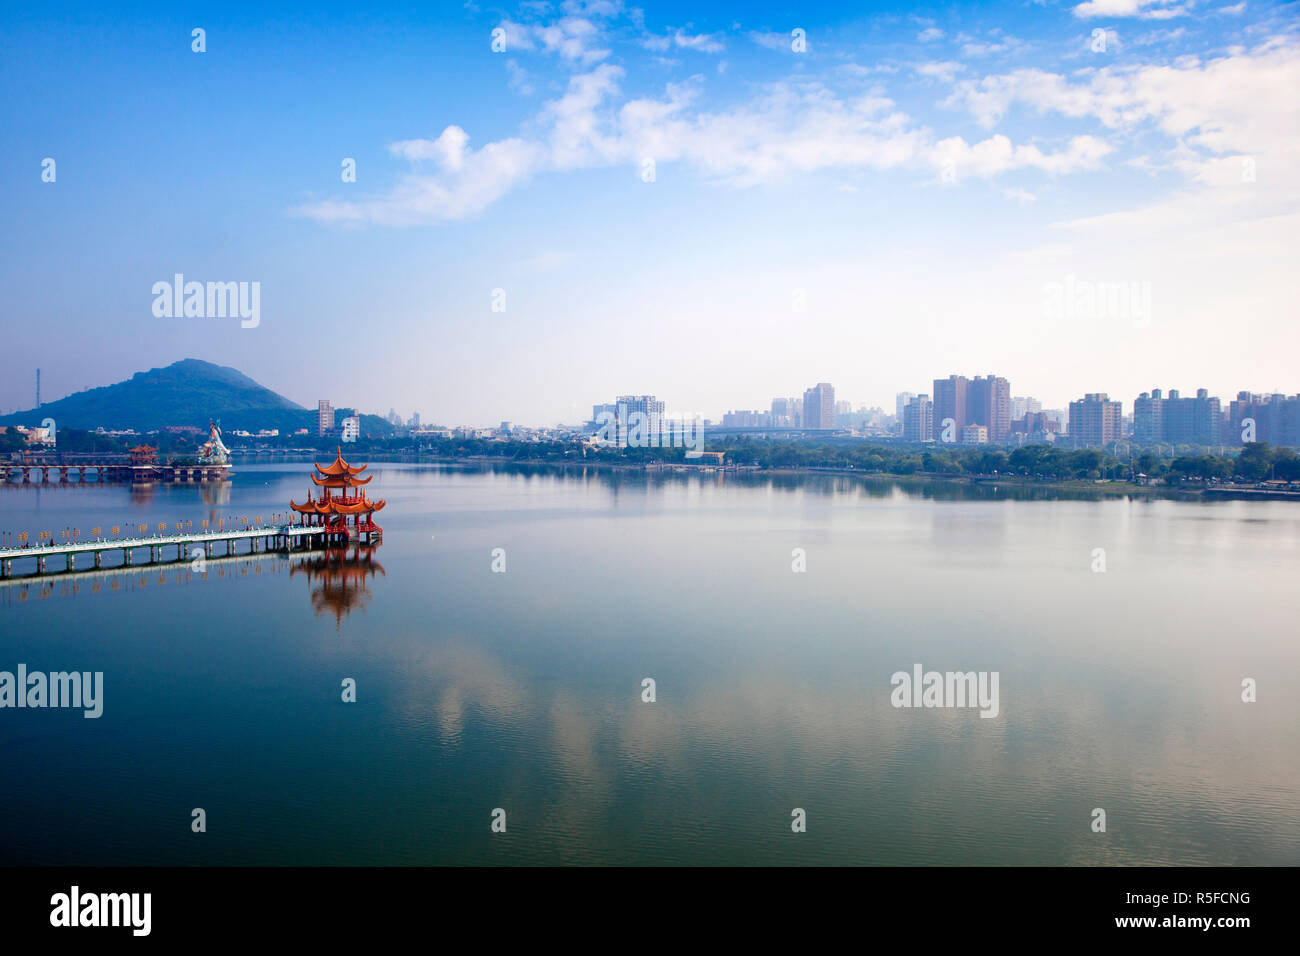 Taiwan, Kaohsiung, Lotus pond, View of bridge leading to Spring and Autumn pagodas with statue of Syuan Tian Emperor in background Stock Photo